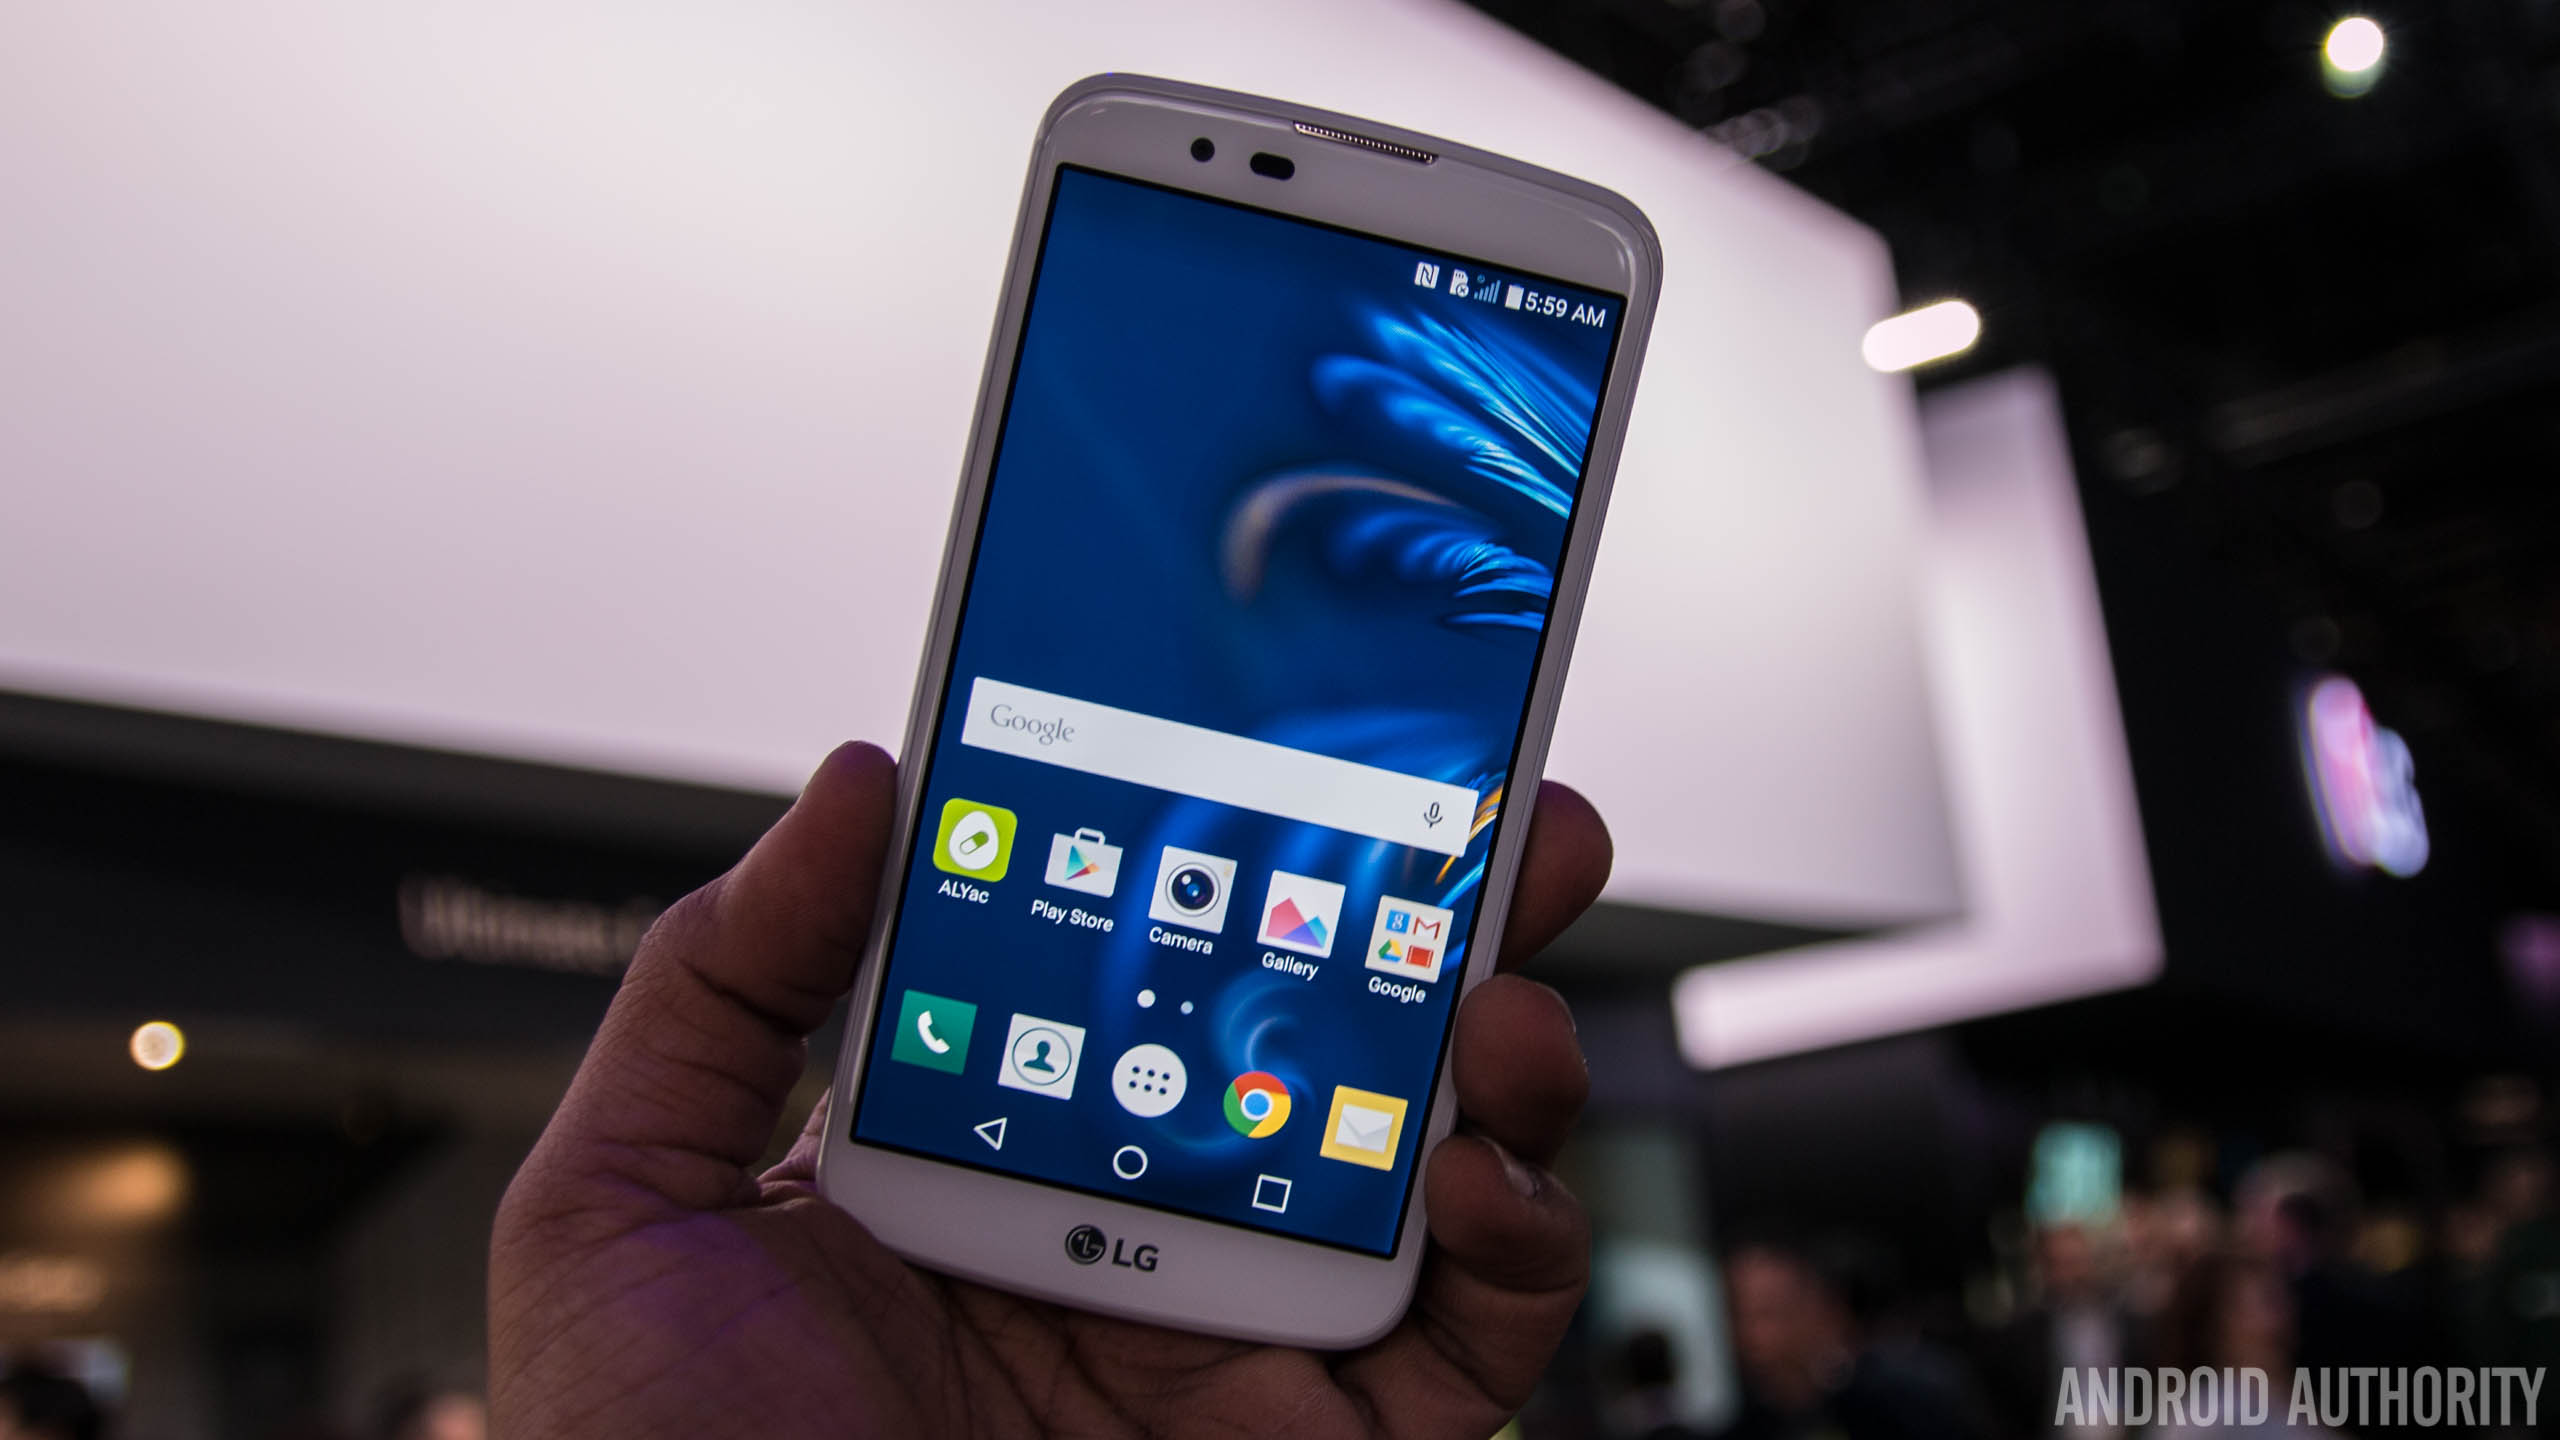 Hands on with the fashion focused LG K10 and K7 - Android Authority